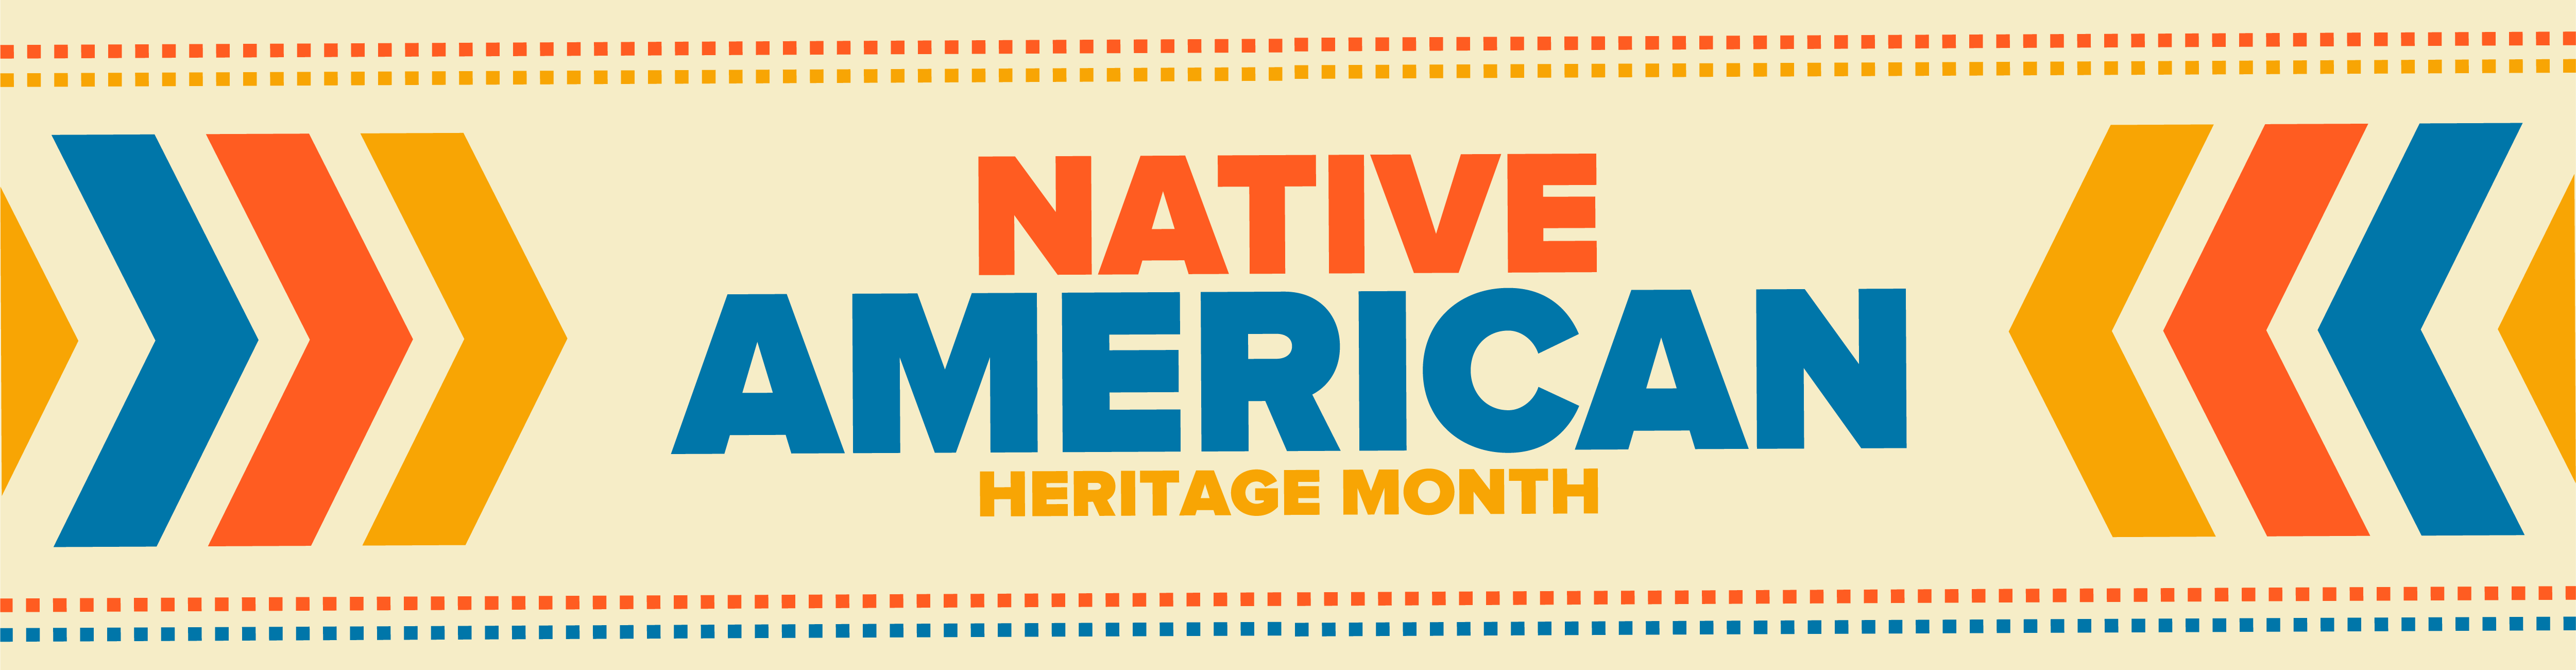 Blue, orange and Yellow horizontal arrows pointing inwards to the words Native American Heritage Month.